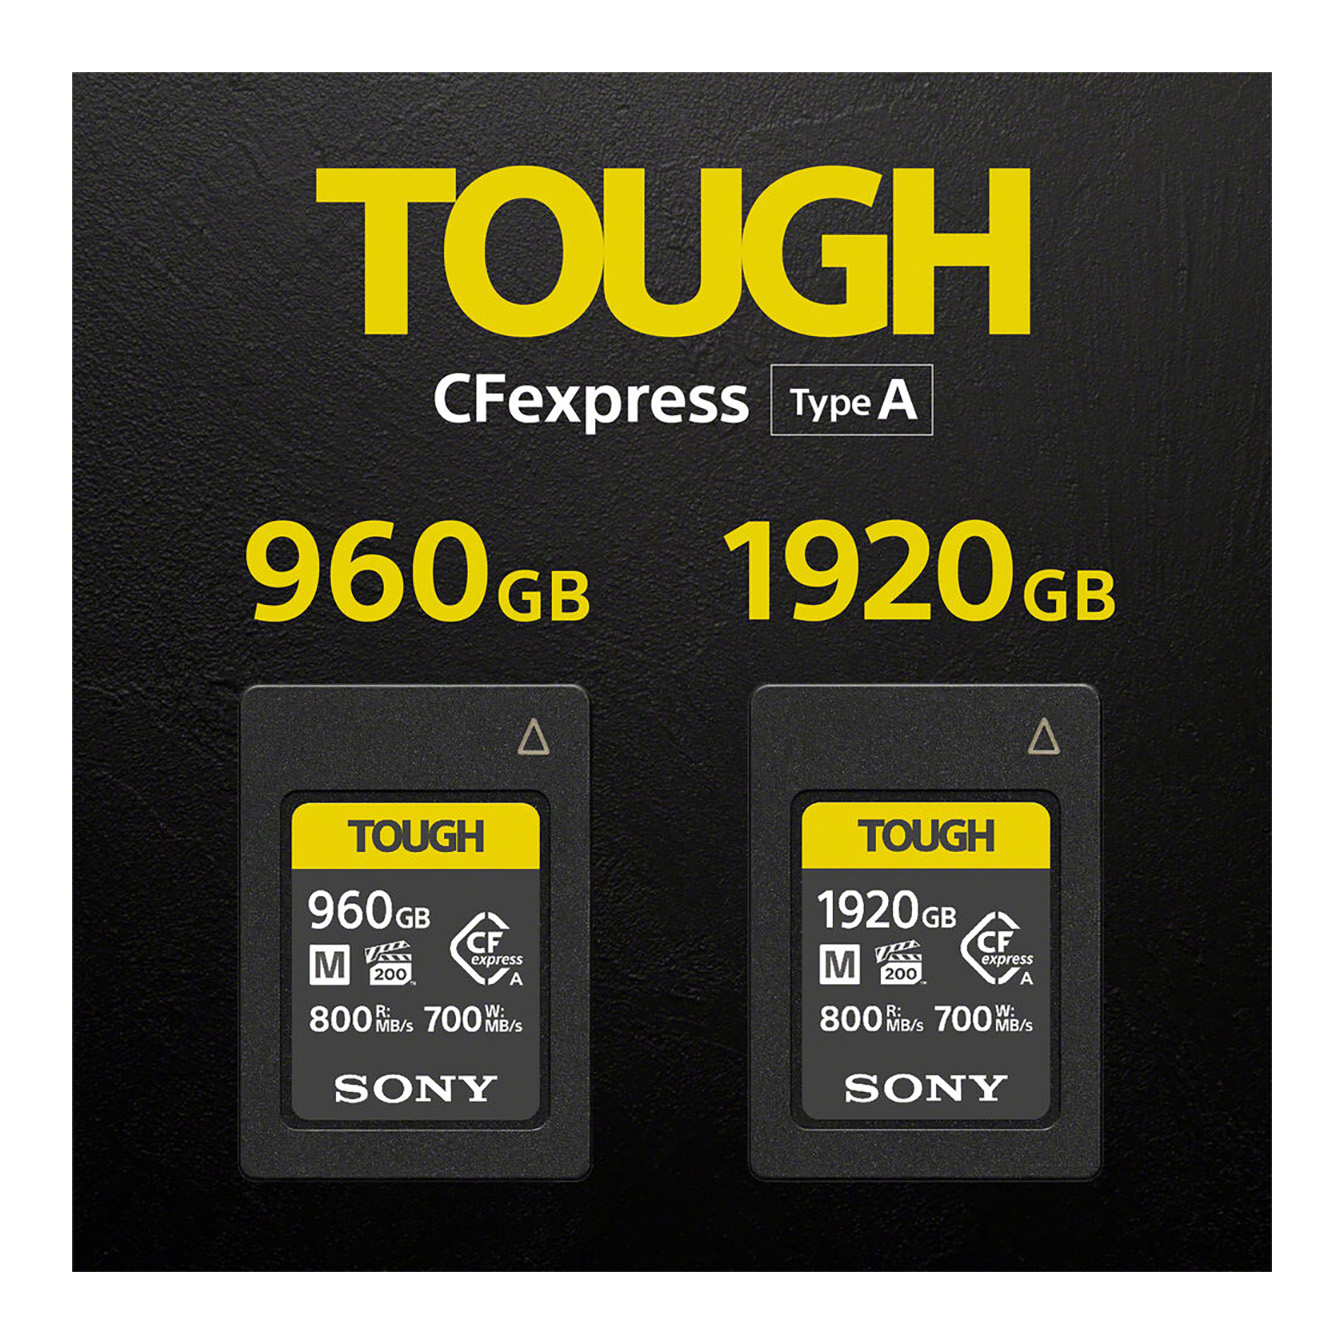 Sony 960GB CFexpress Type A TOUGH Memory Card - The Camera Exchange